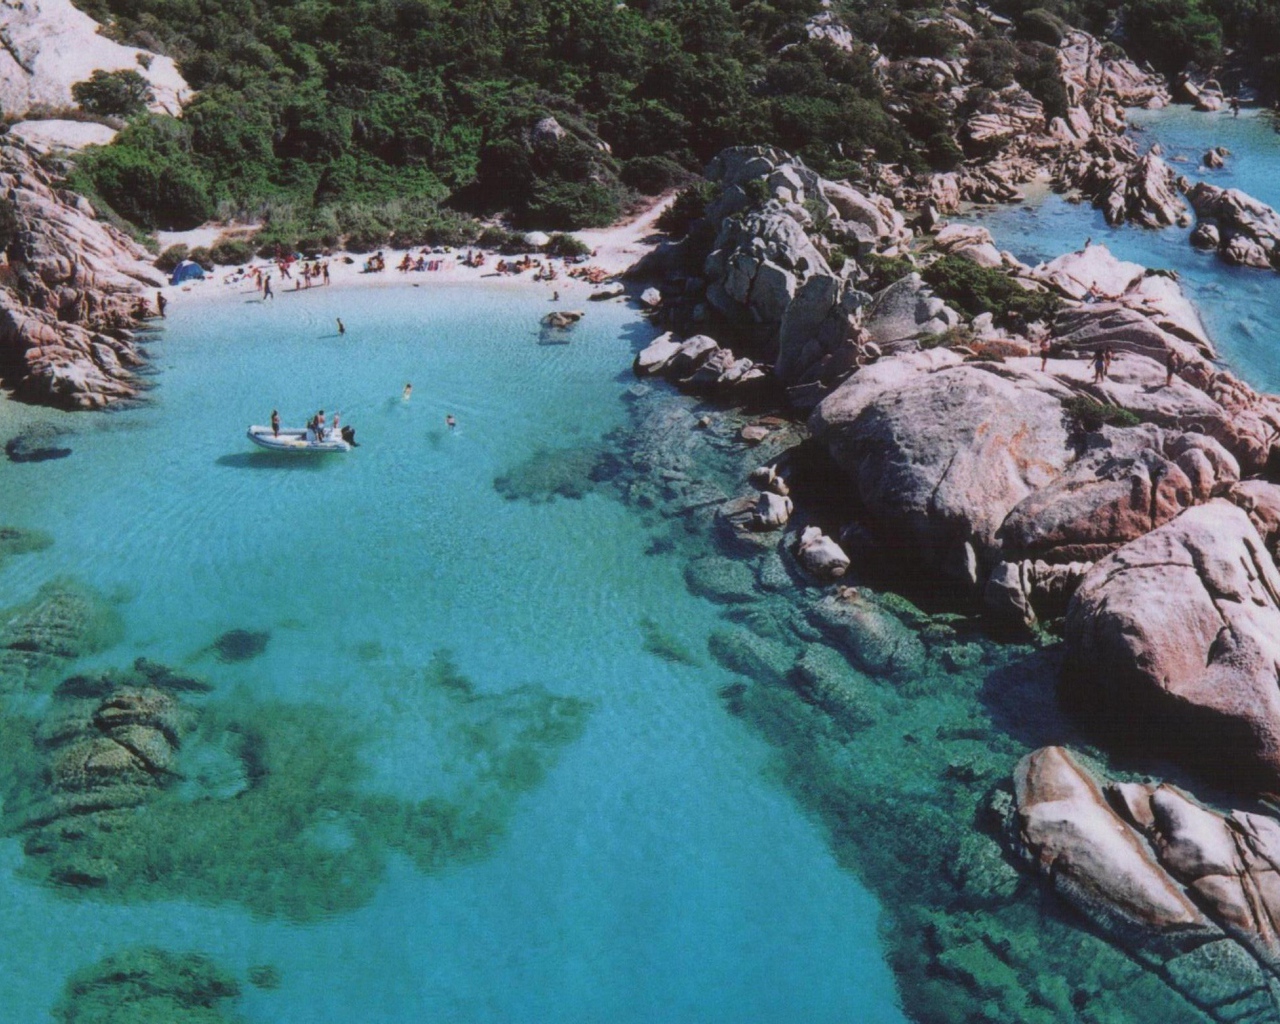 Clear water in the lagoon on the Costa Smeralda, Italy